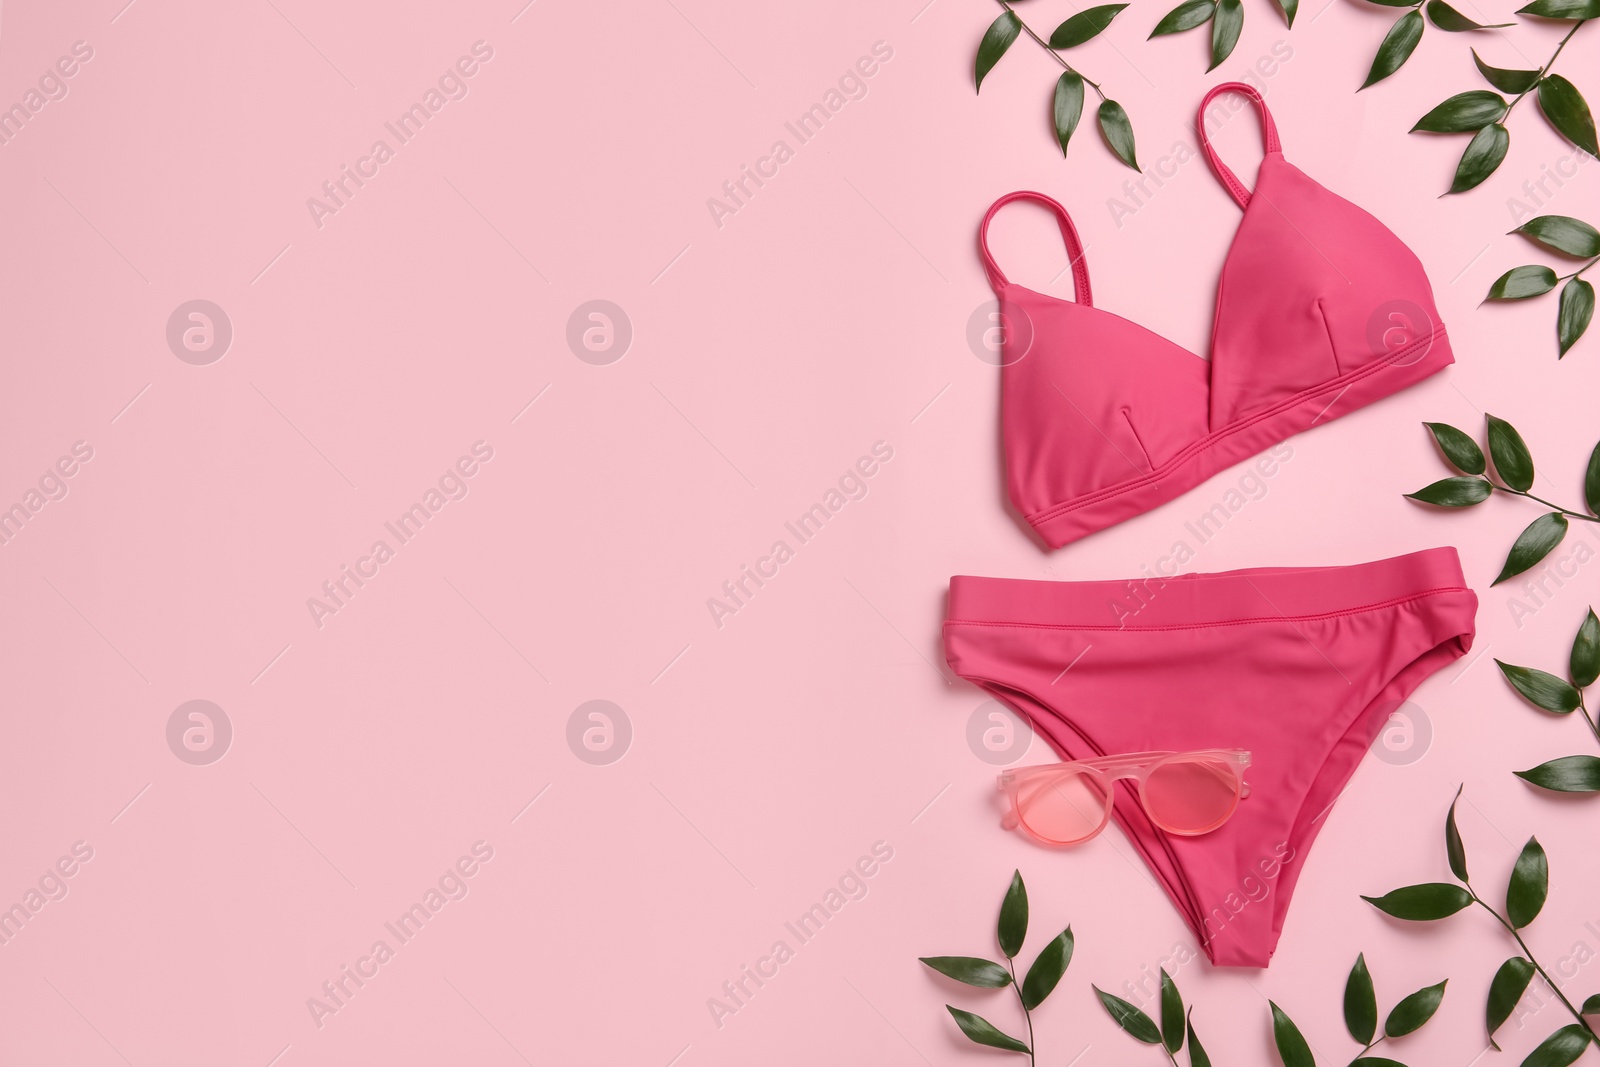 Photo of Stylish bikini, sunglasses and green leaves on pink background, flat lay. Space for text